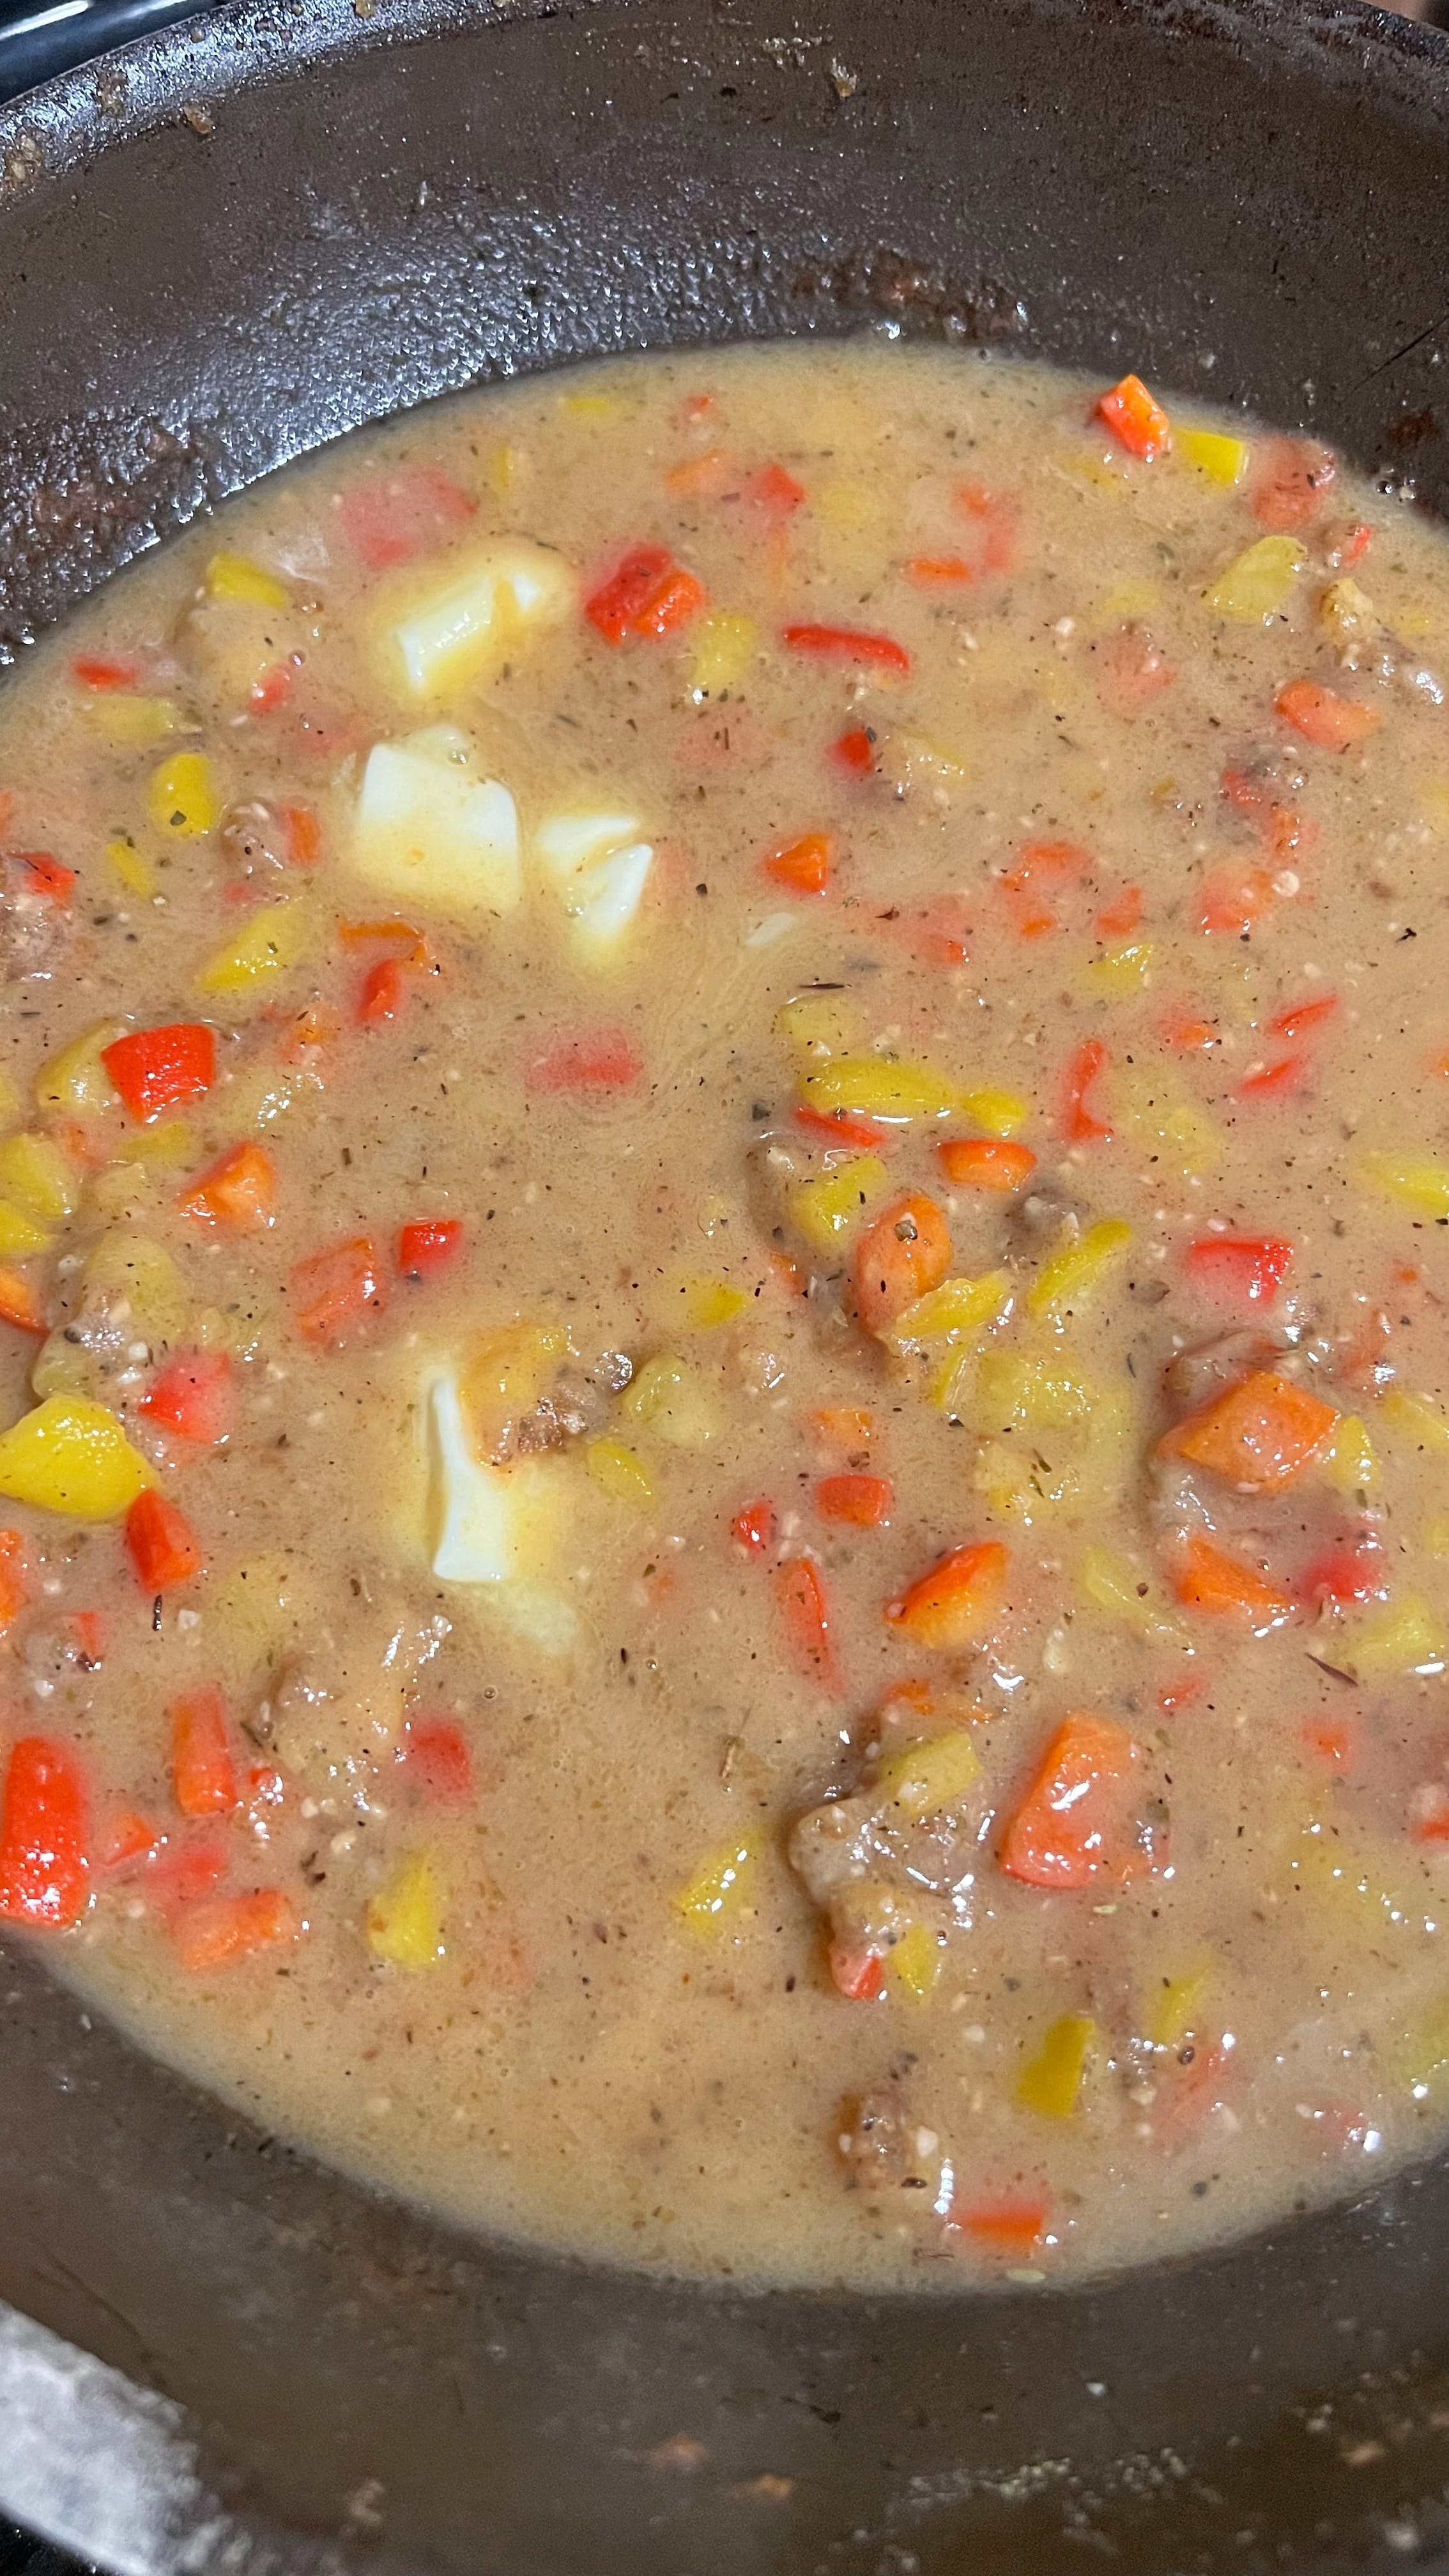 Add chicken broth and butter to garlic and bell pepper.